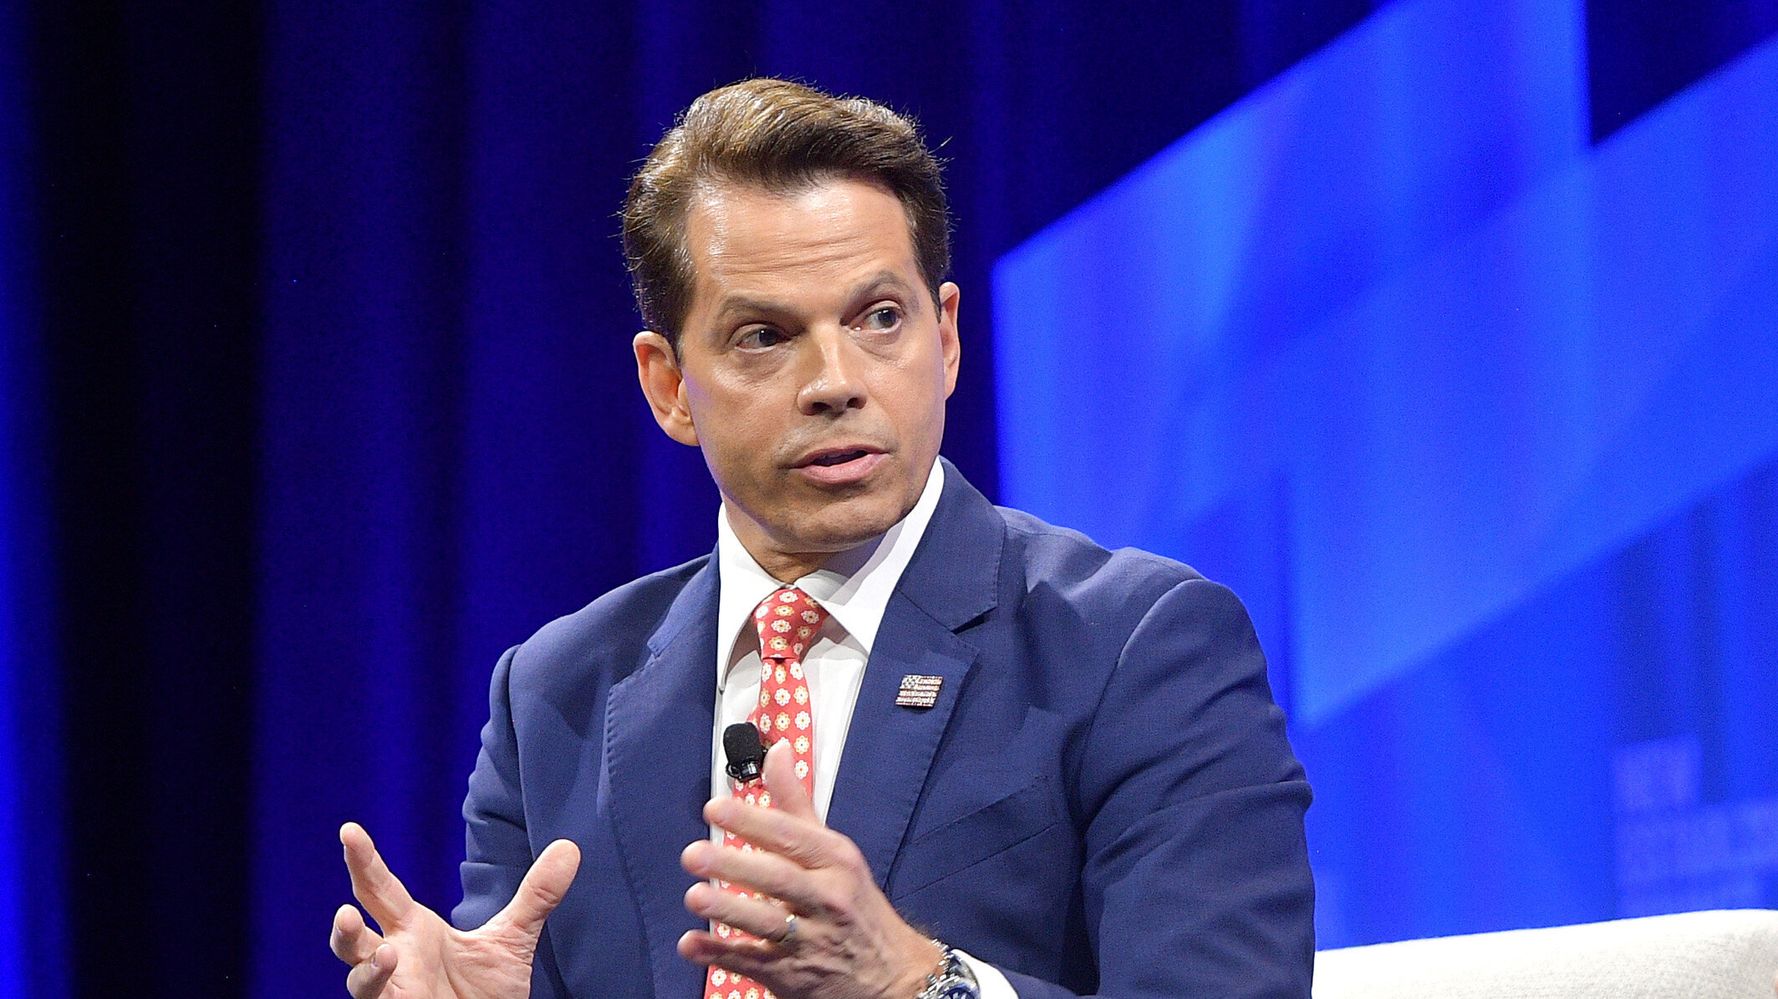 Anthony Scaramucci: Donald Trump ‘Does Not Care About His Legacy’